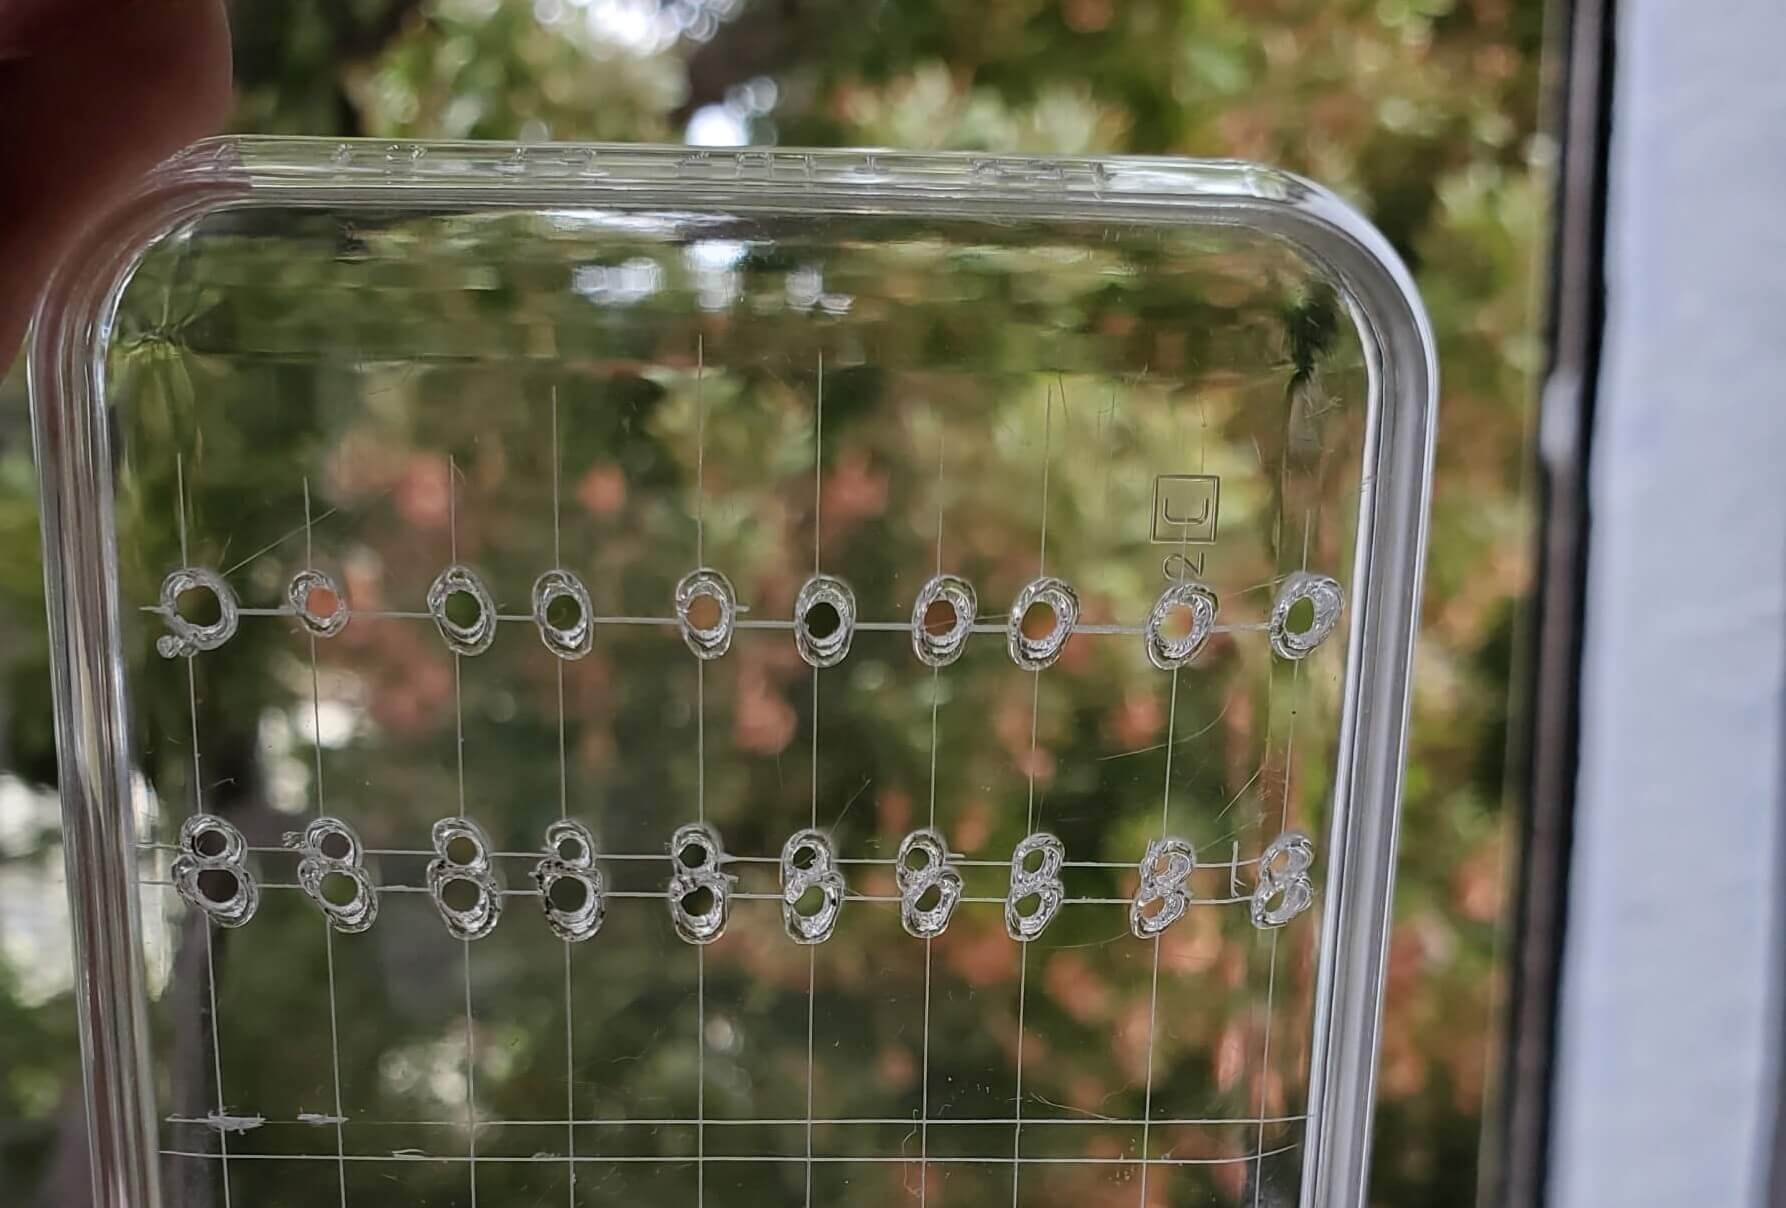 Holes burned into the plastic